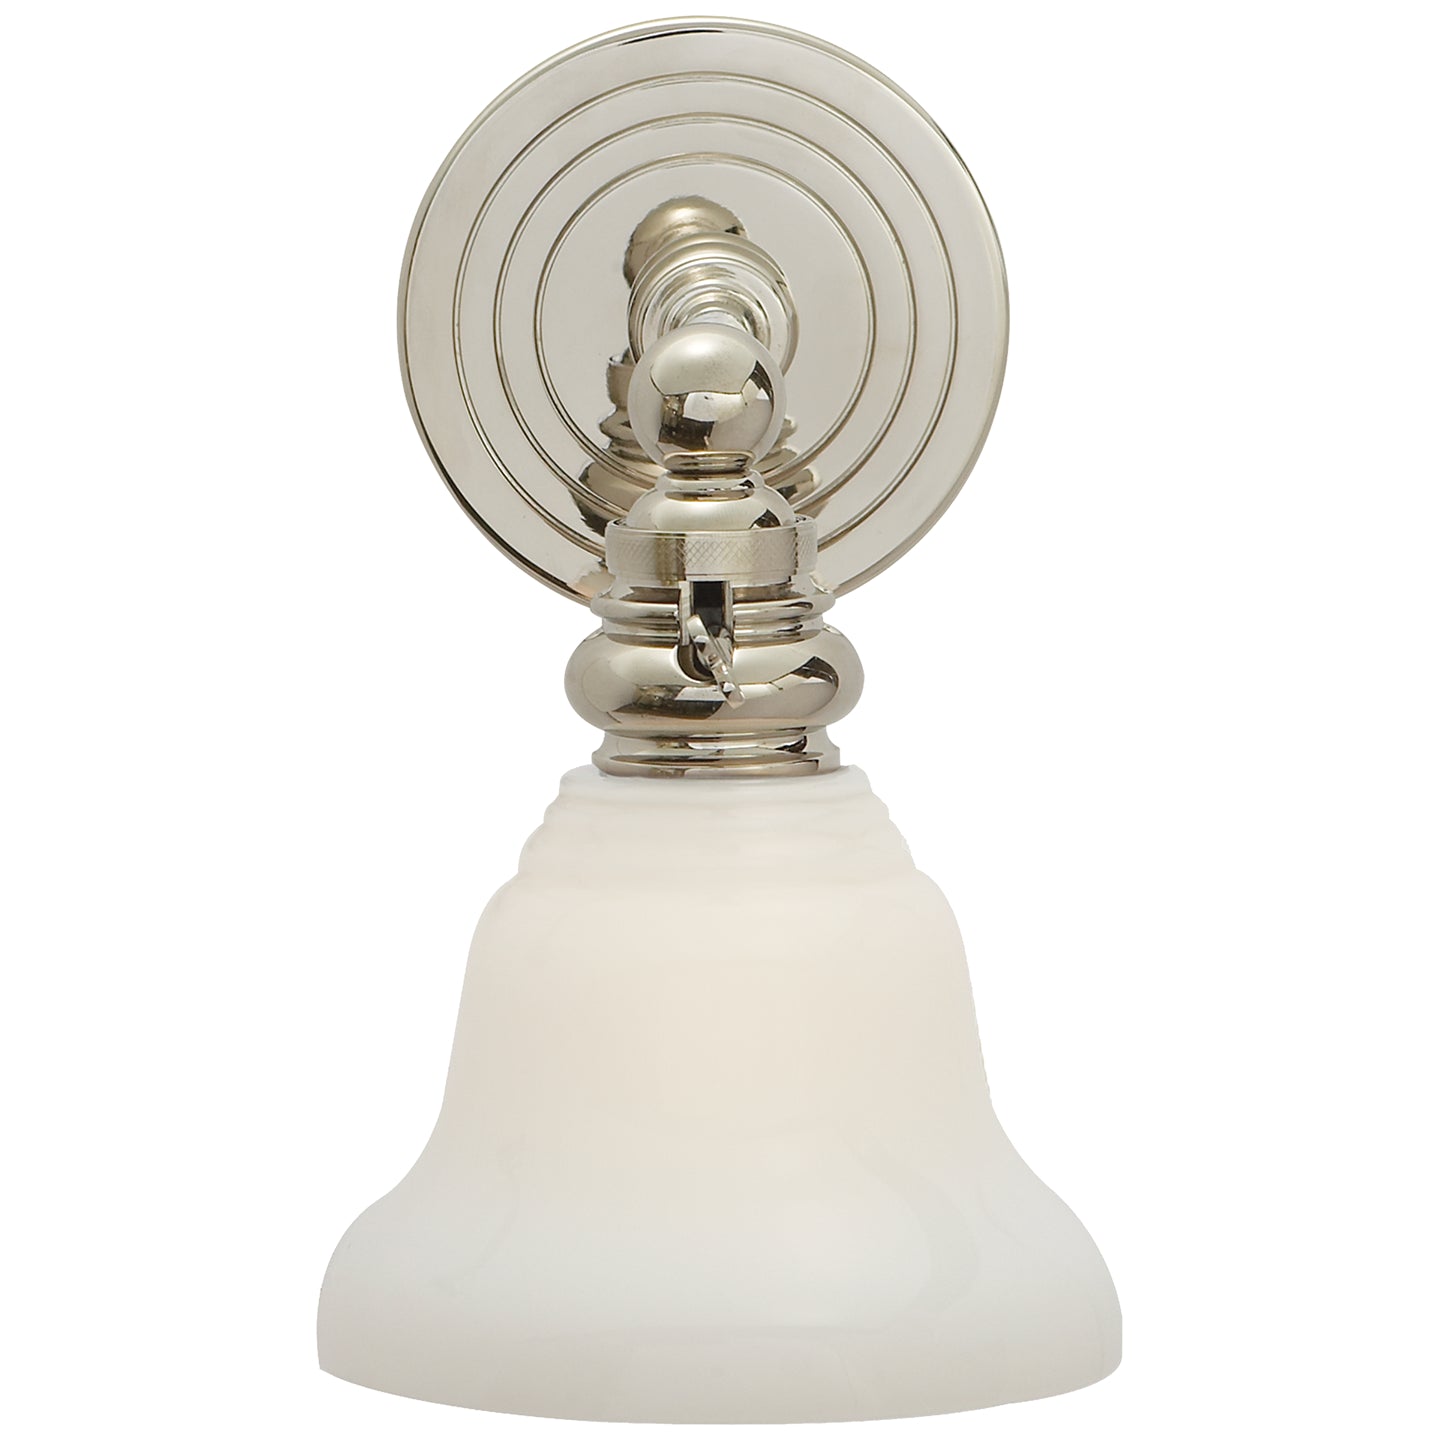 Load image into Gallery viewer, Visual Comfort Signature - SL 2931PN/SLEG-WG - One Light Wall Sconce - Boston - Polished Nickel
